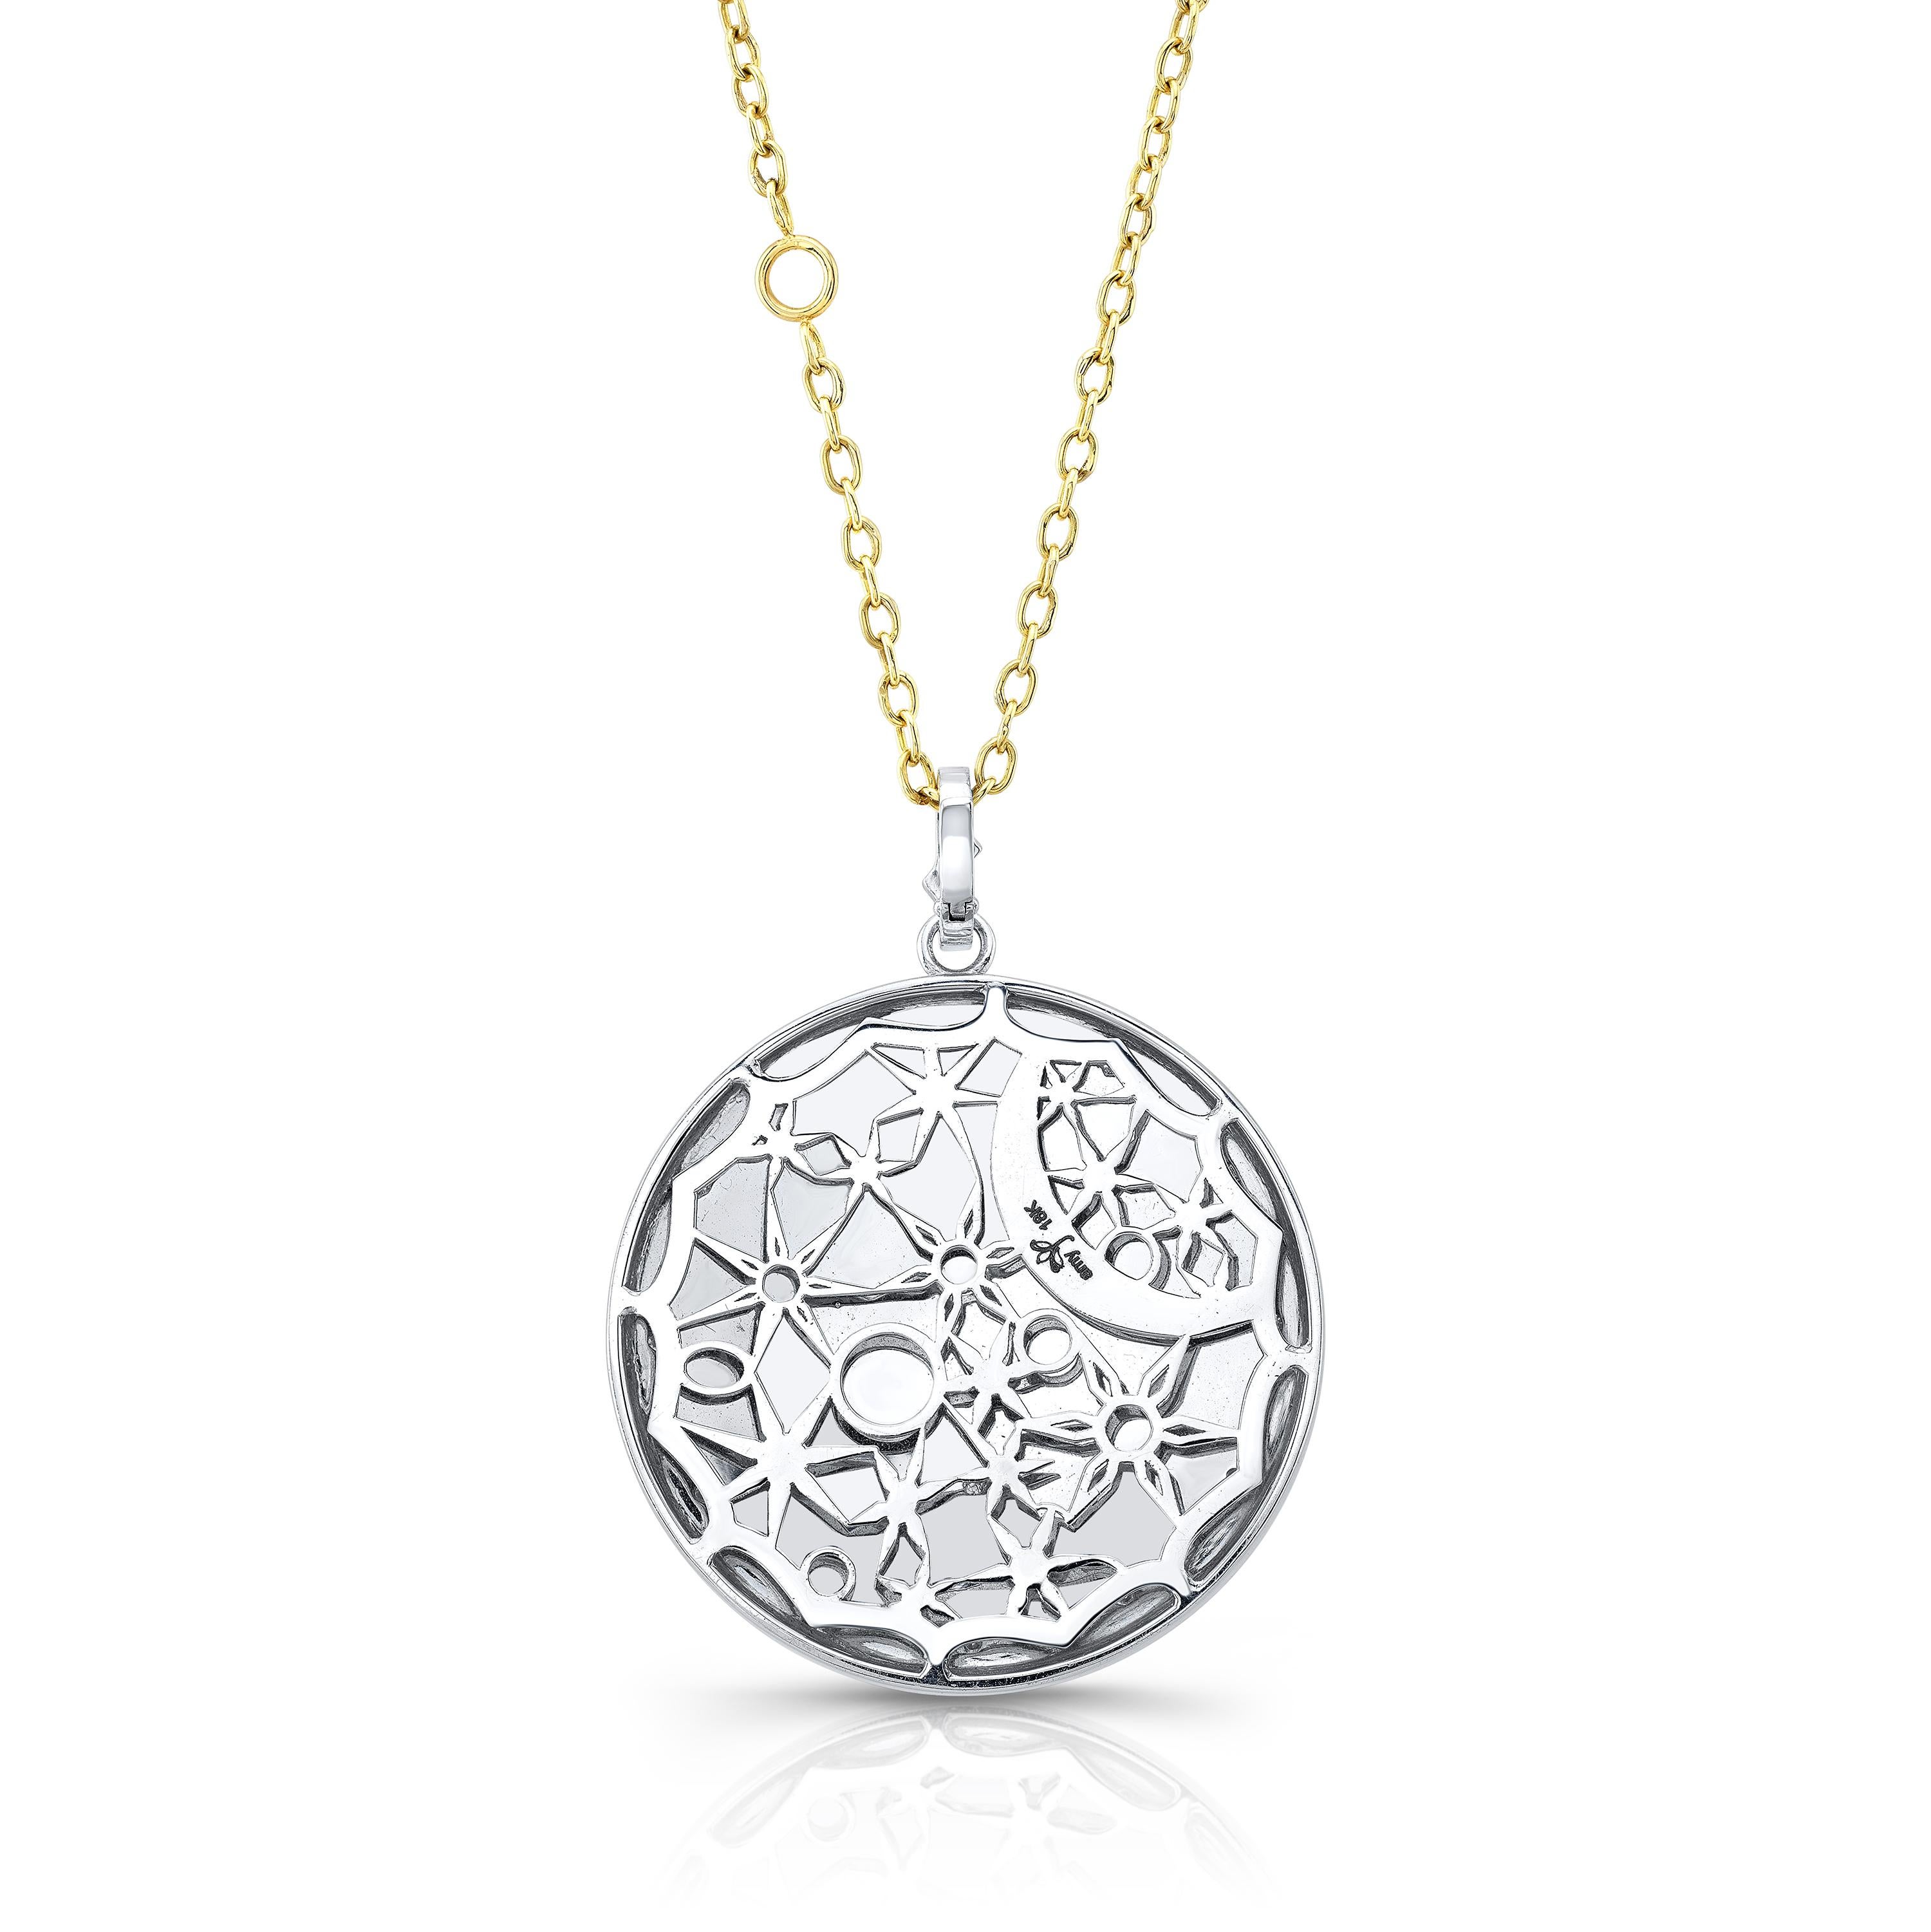 Amy Y's gorgeous, contemporary Zodiac Leo pendant necklace 'Noah' is forever archived in 18K white gold, natural yellow and white diamonds and painted enamel. This phenomenal one-of-a-kind zodiac sign Leo pendant necklace captures the lion and